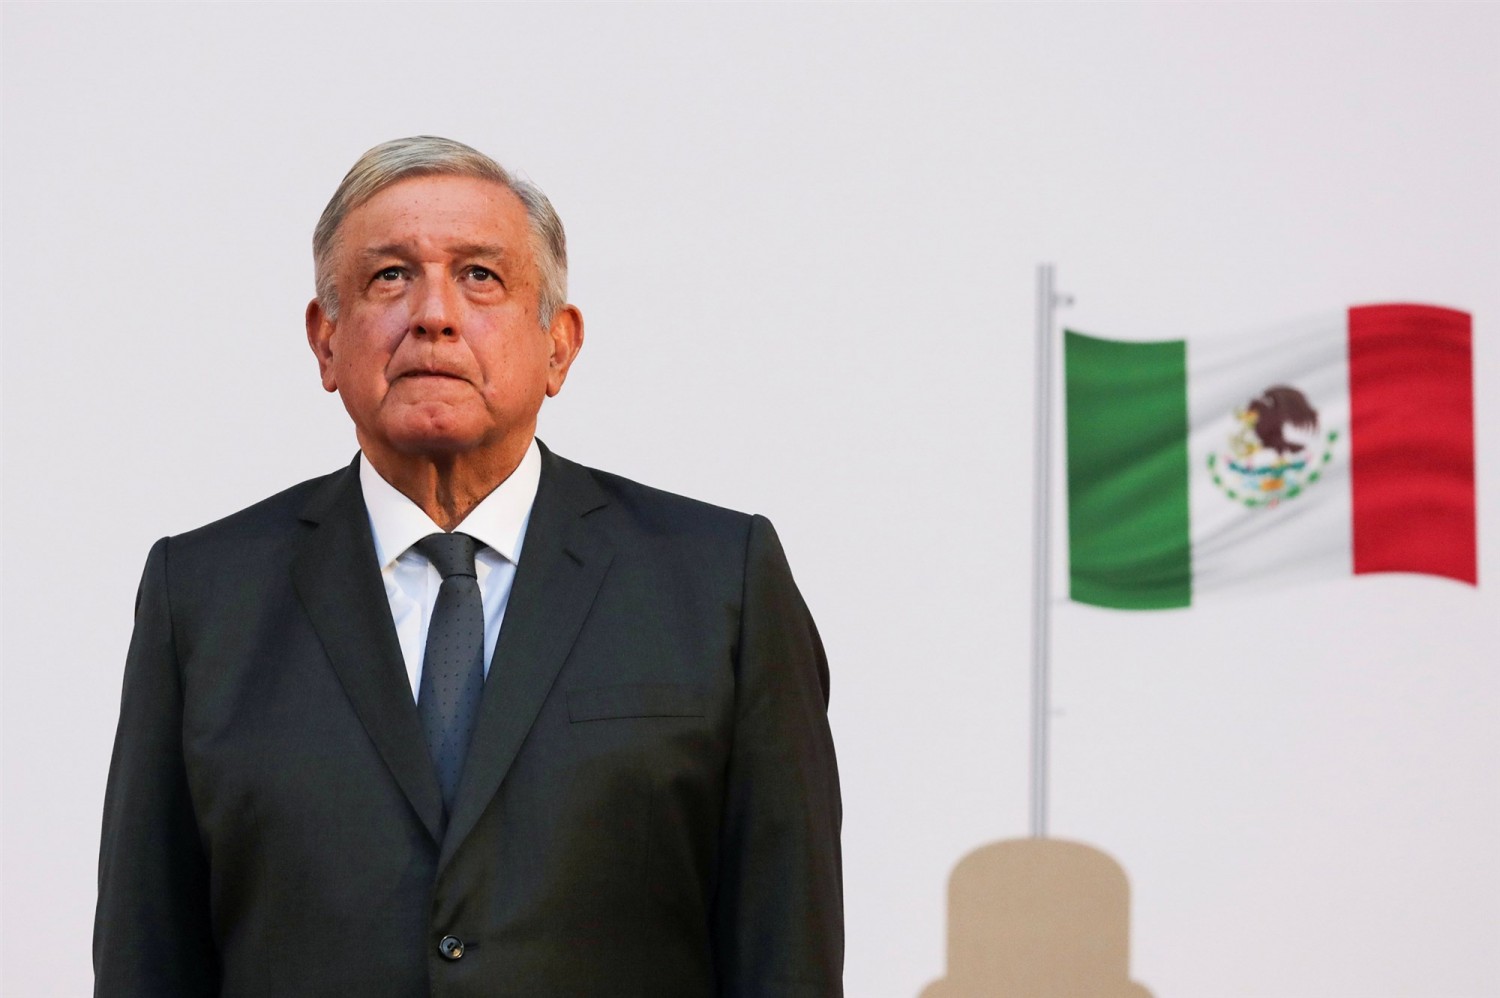 Andres Manuel Lopez Obrador listens to the national anthem after addressing the nation on his second anniversary as president in Mexico City on Dec. 1, 2020.Henry Romero / Reuter